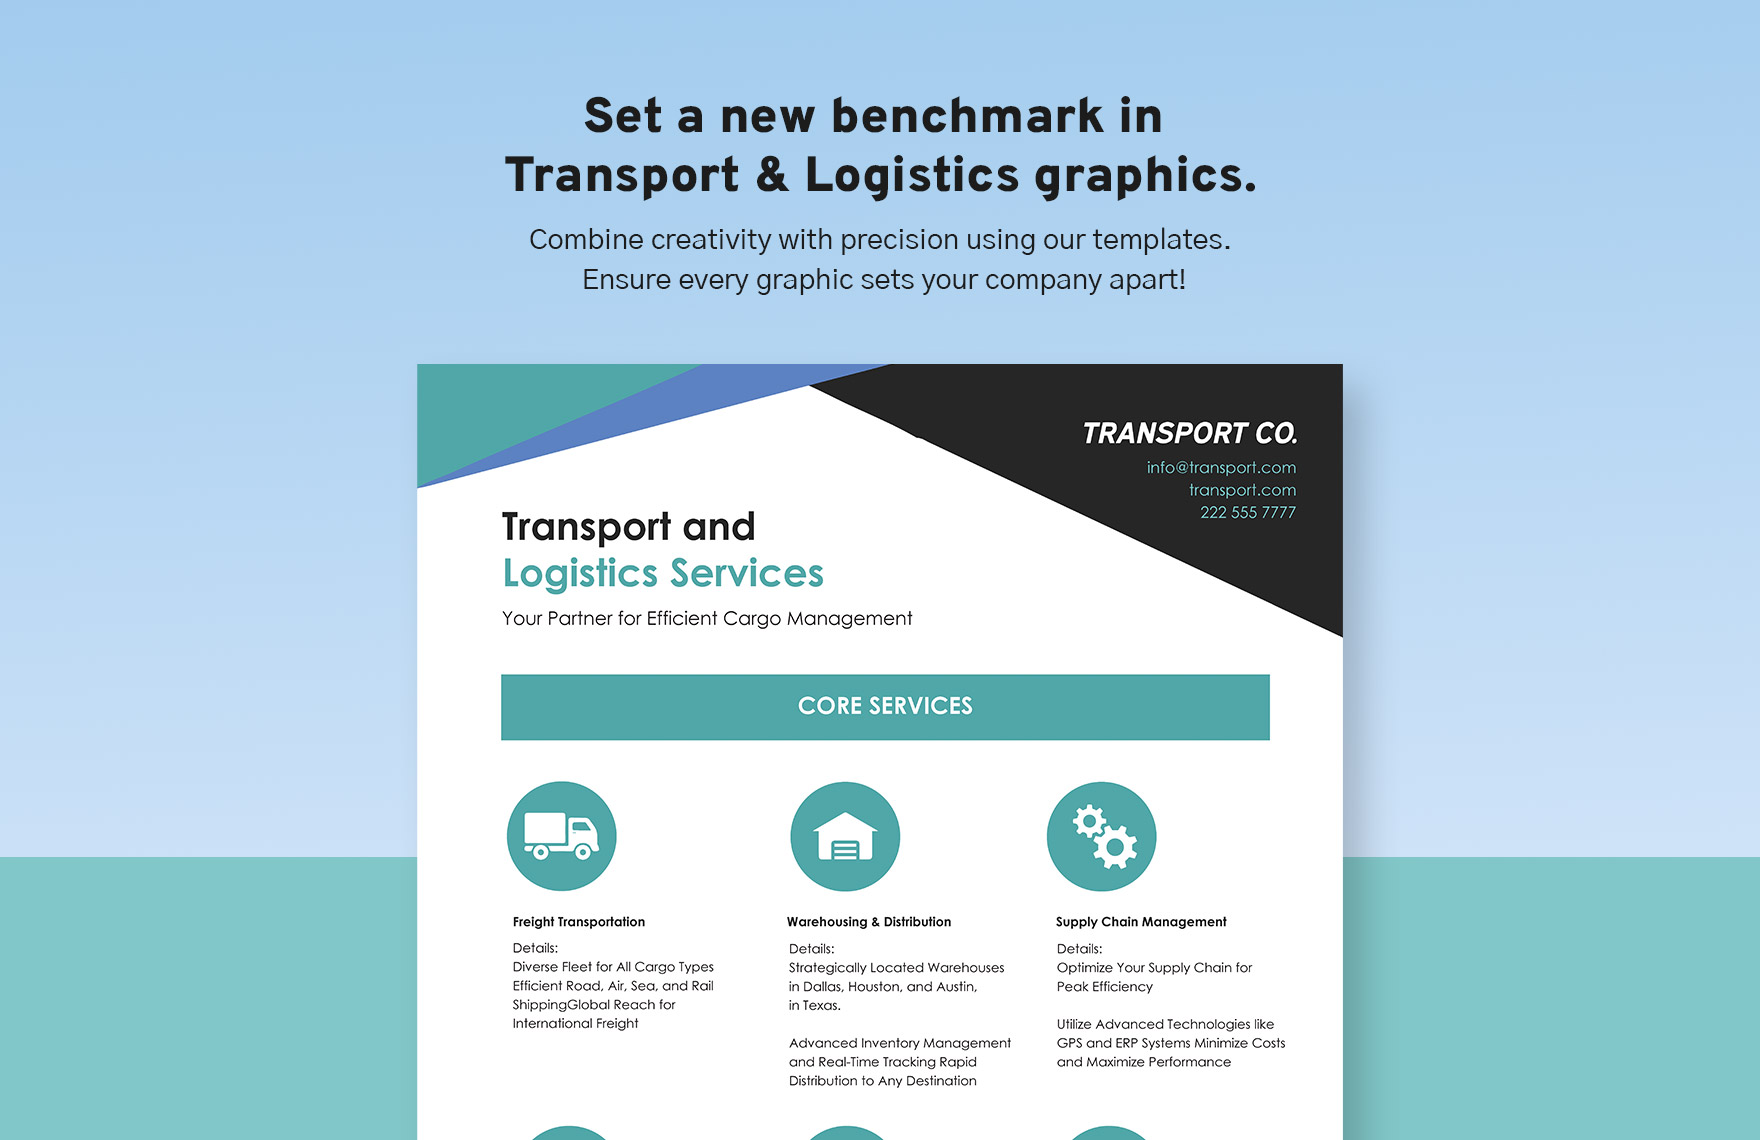 Transport and Logistics Service Offering Infographic Template